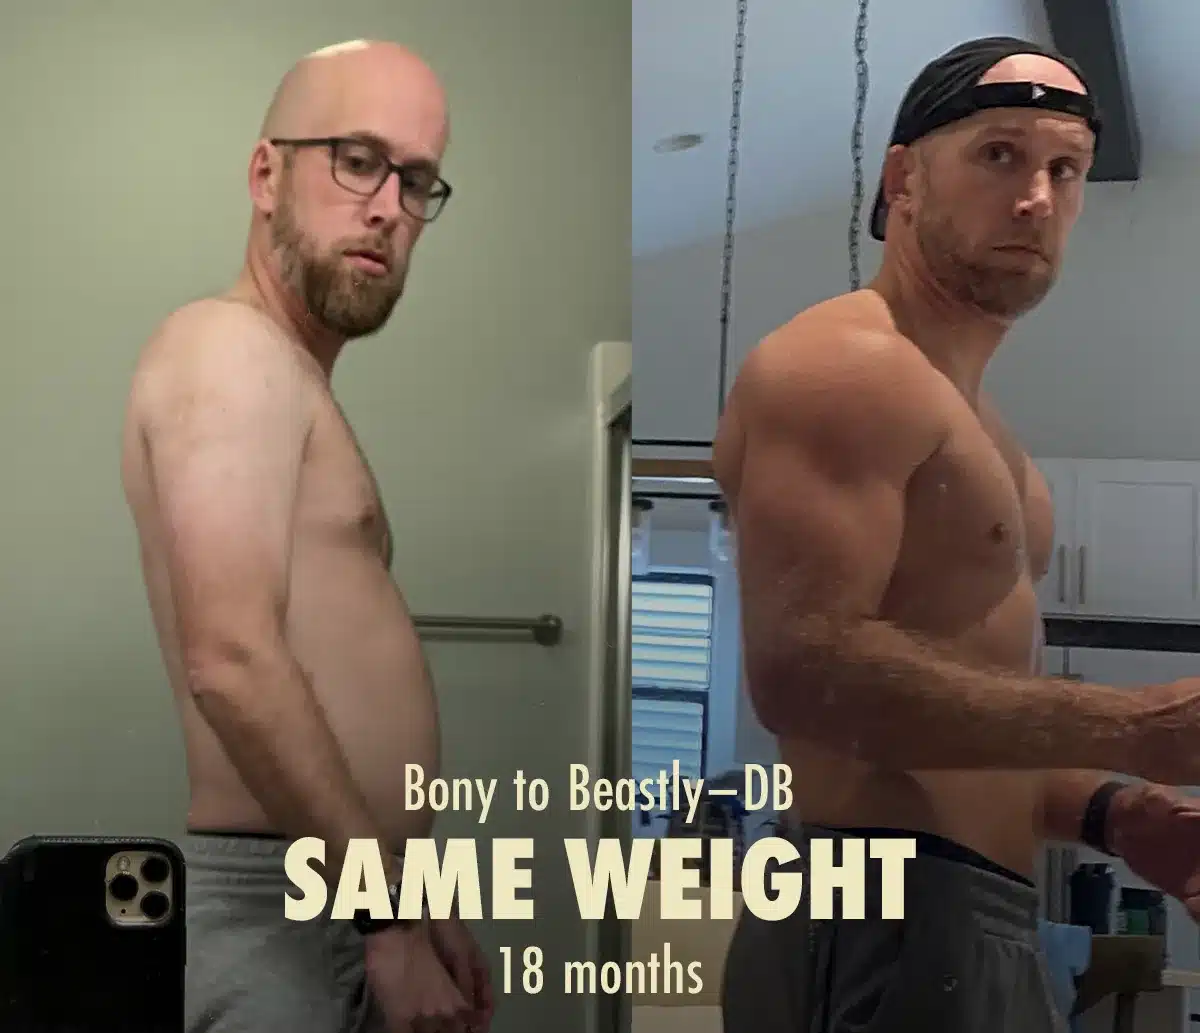 Before-and-after photo showing a man's skinny fat to muscular transformation.